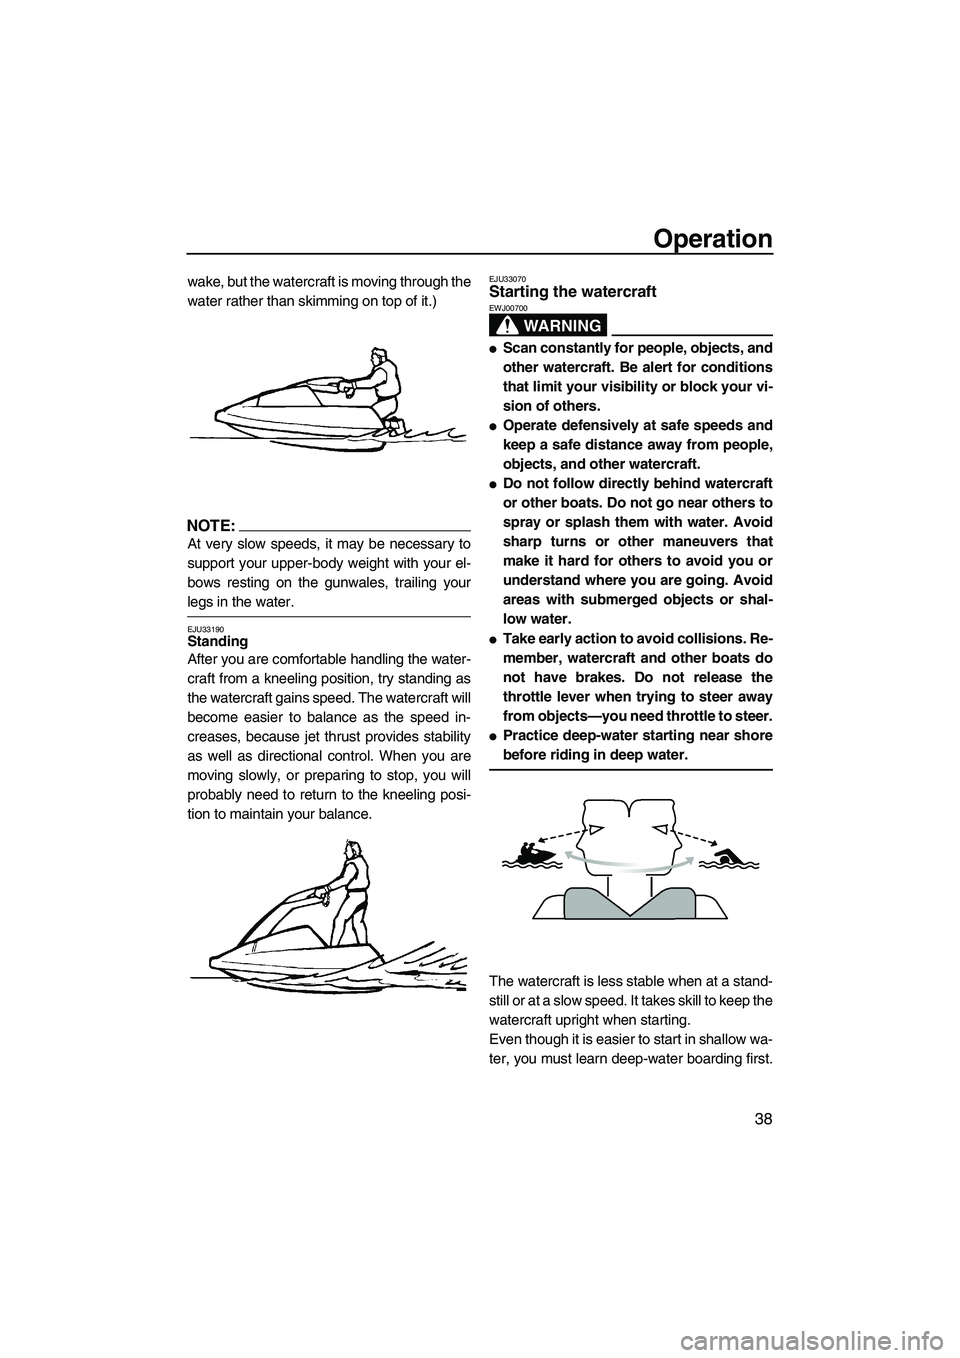 YAMAHA SUPERJET 2007  Owners Manual Operation
38
wake, but the watercraft is moving through the
water rather than skimming on top of it.)
NOTE:
At very slow speeds, it may be necessary to
support your upper-body weight with your el-
bow